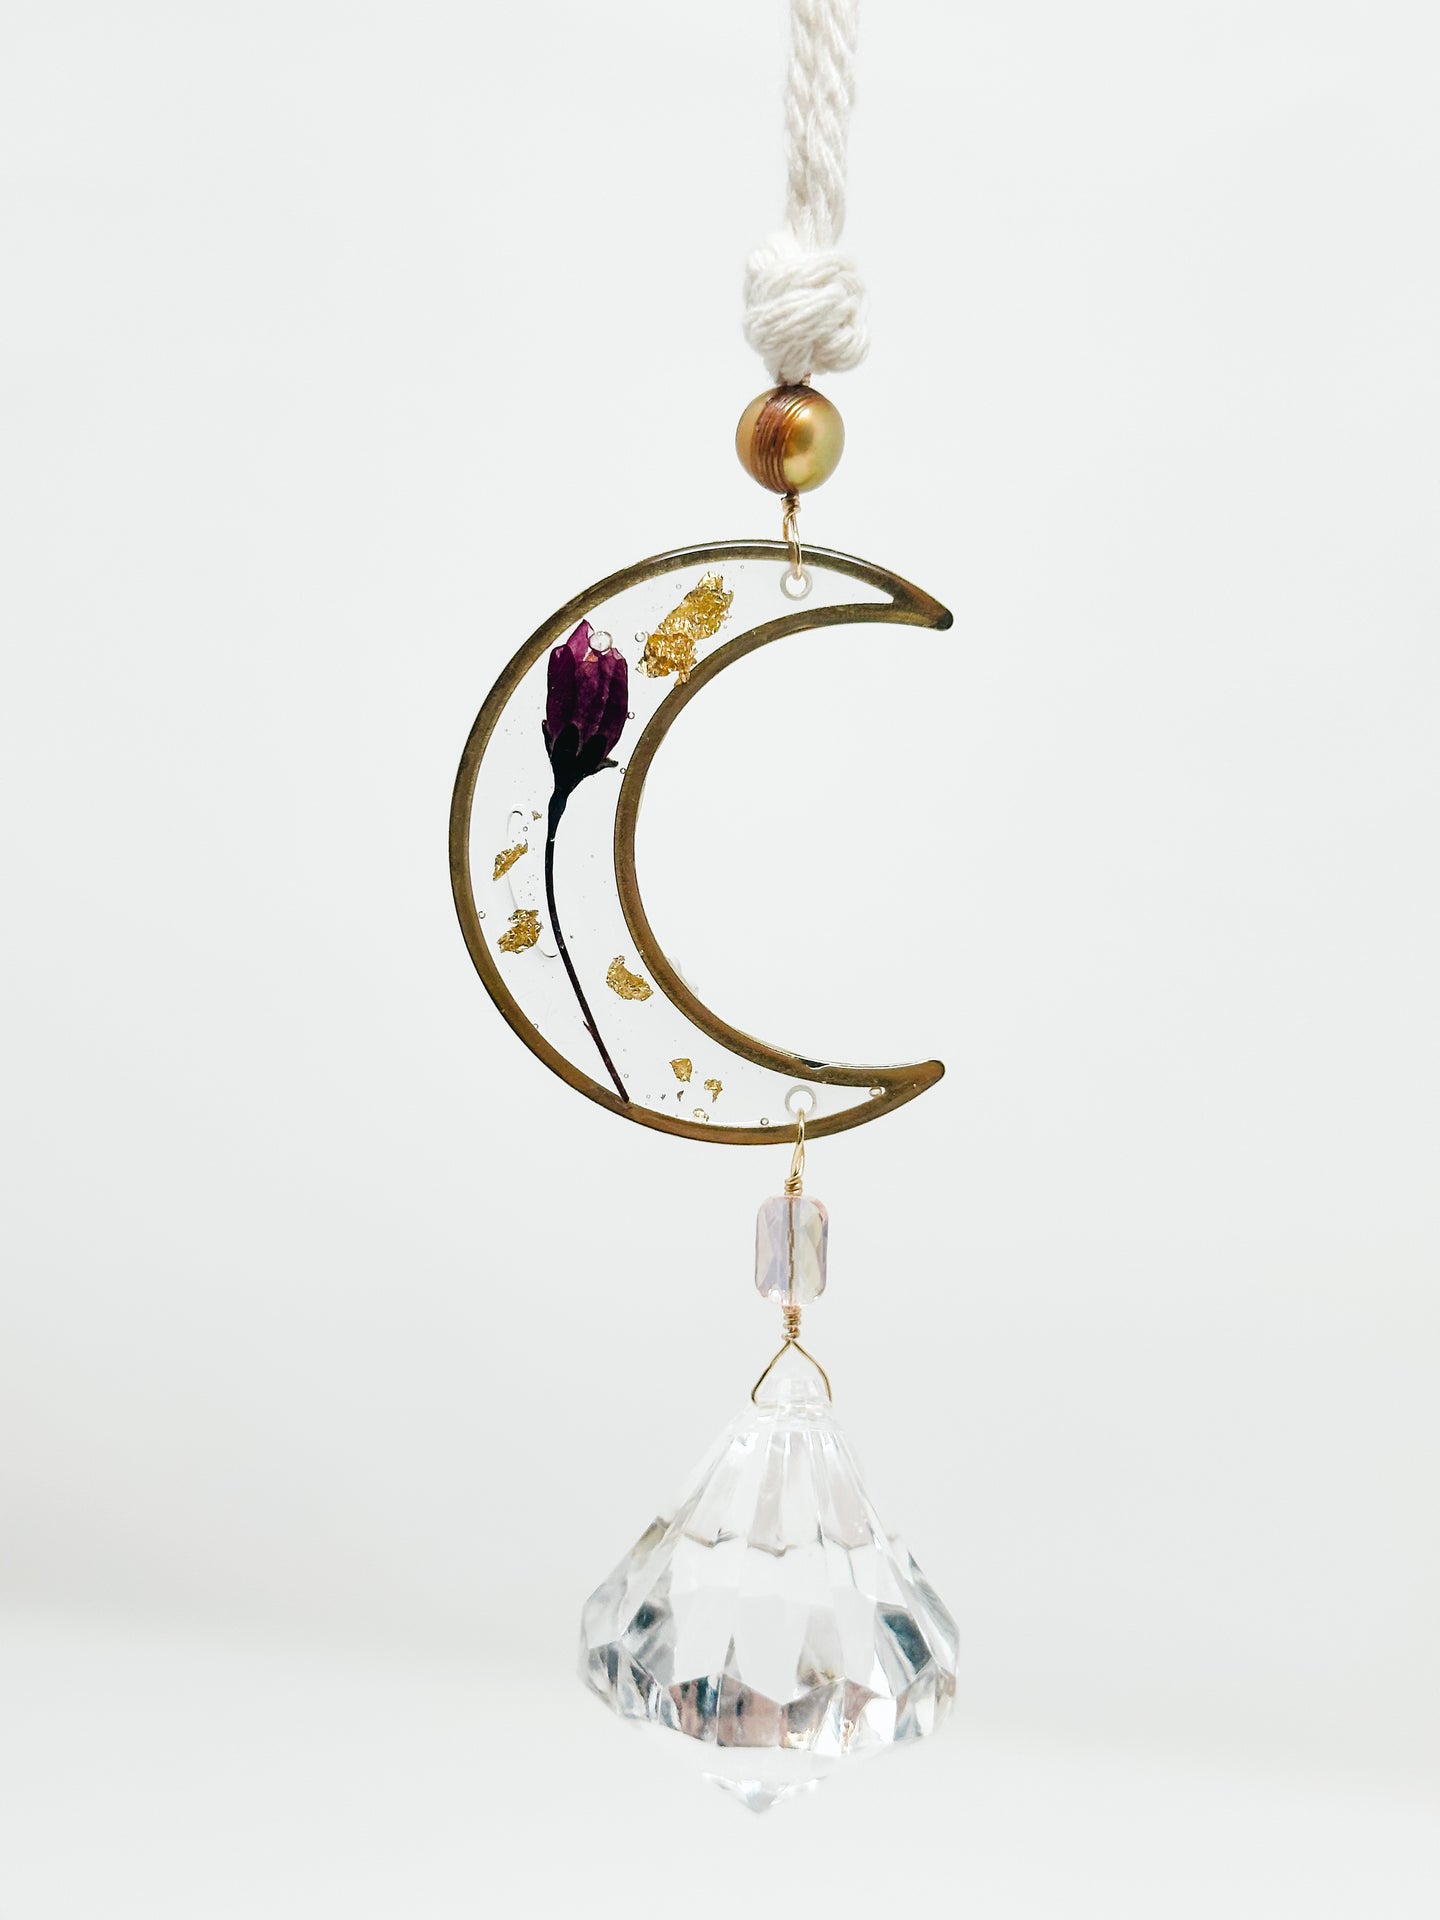 Rearview pearl and rose pressed flower-Moon Sun Catcher Accessory